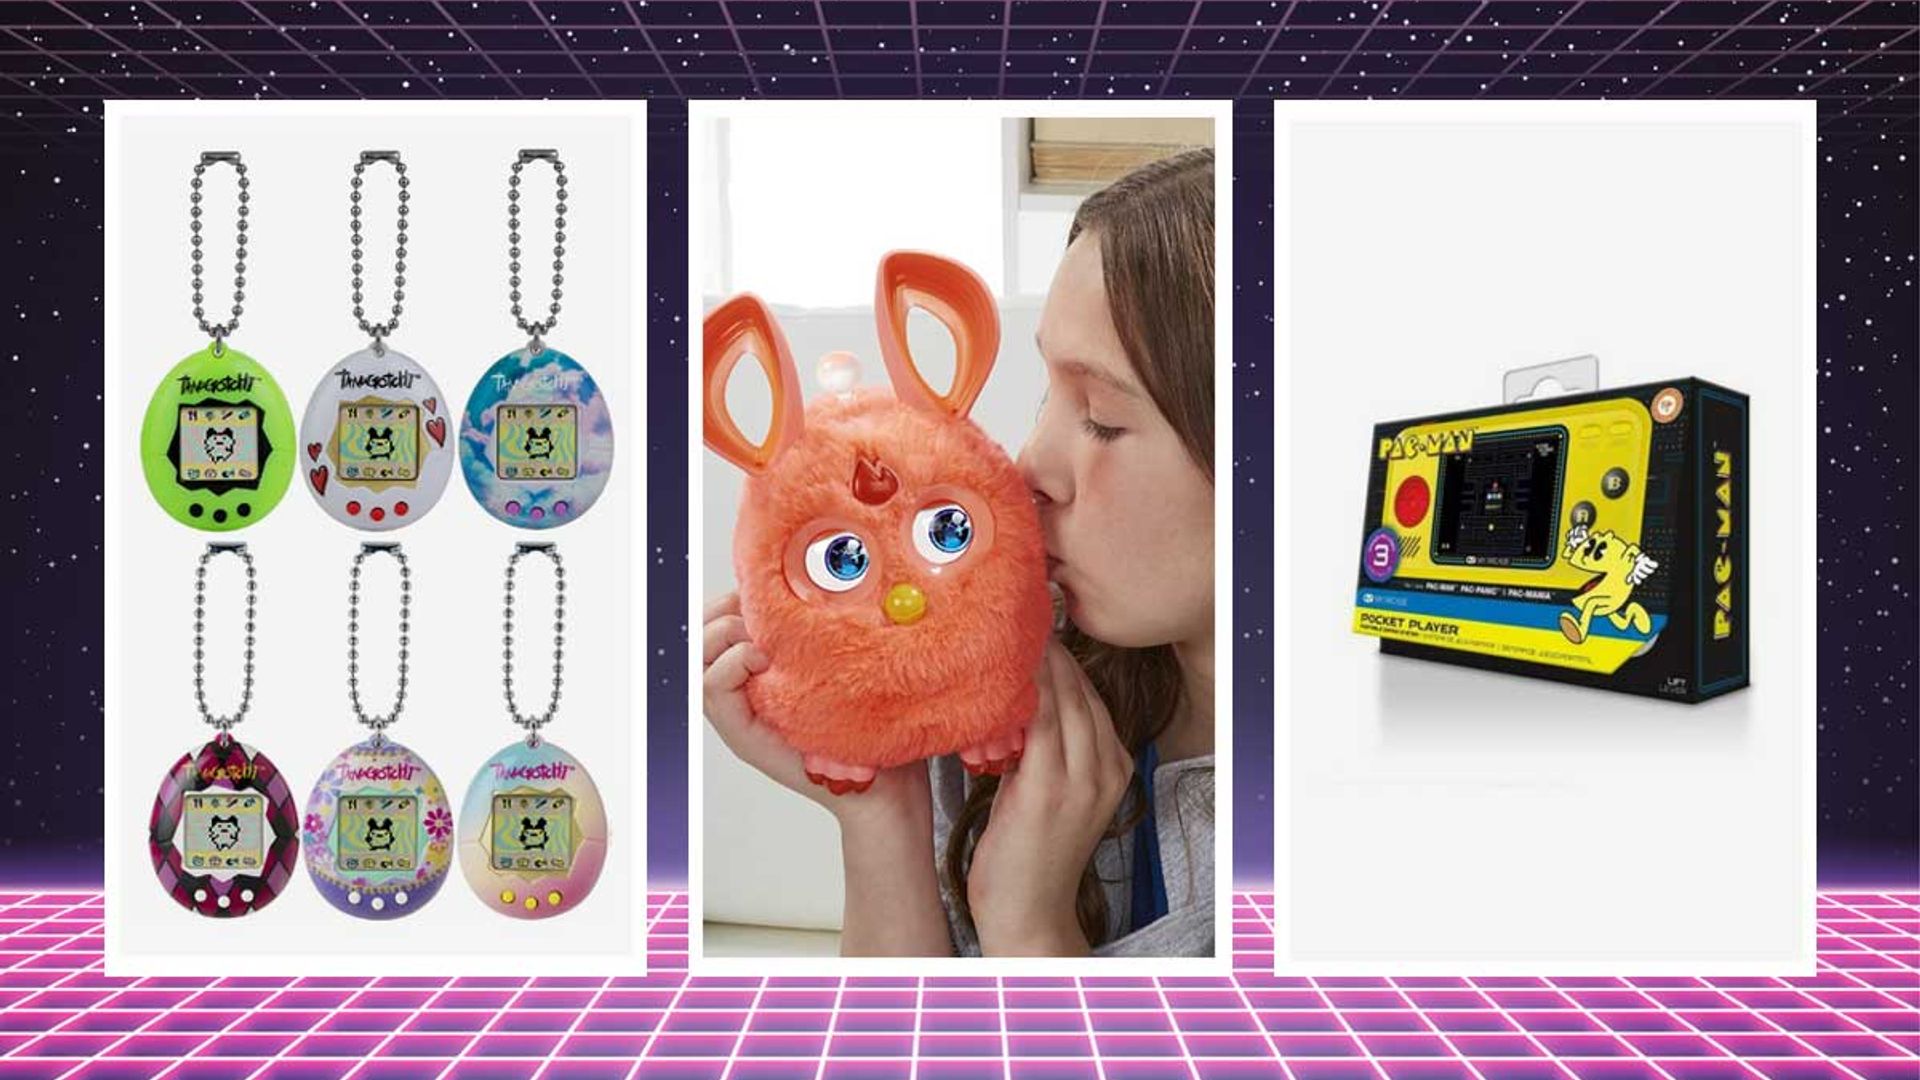 Cool retro toys & vintage games you can buy online: 80s PAC-MAN, 90s Tamagotchis & more